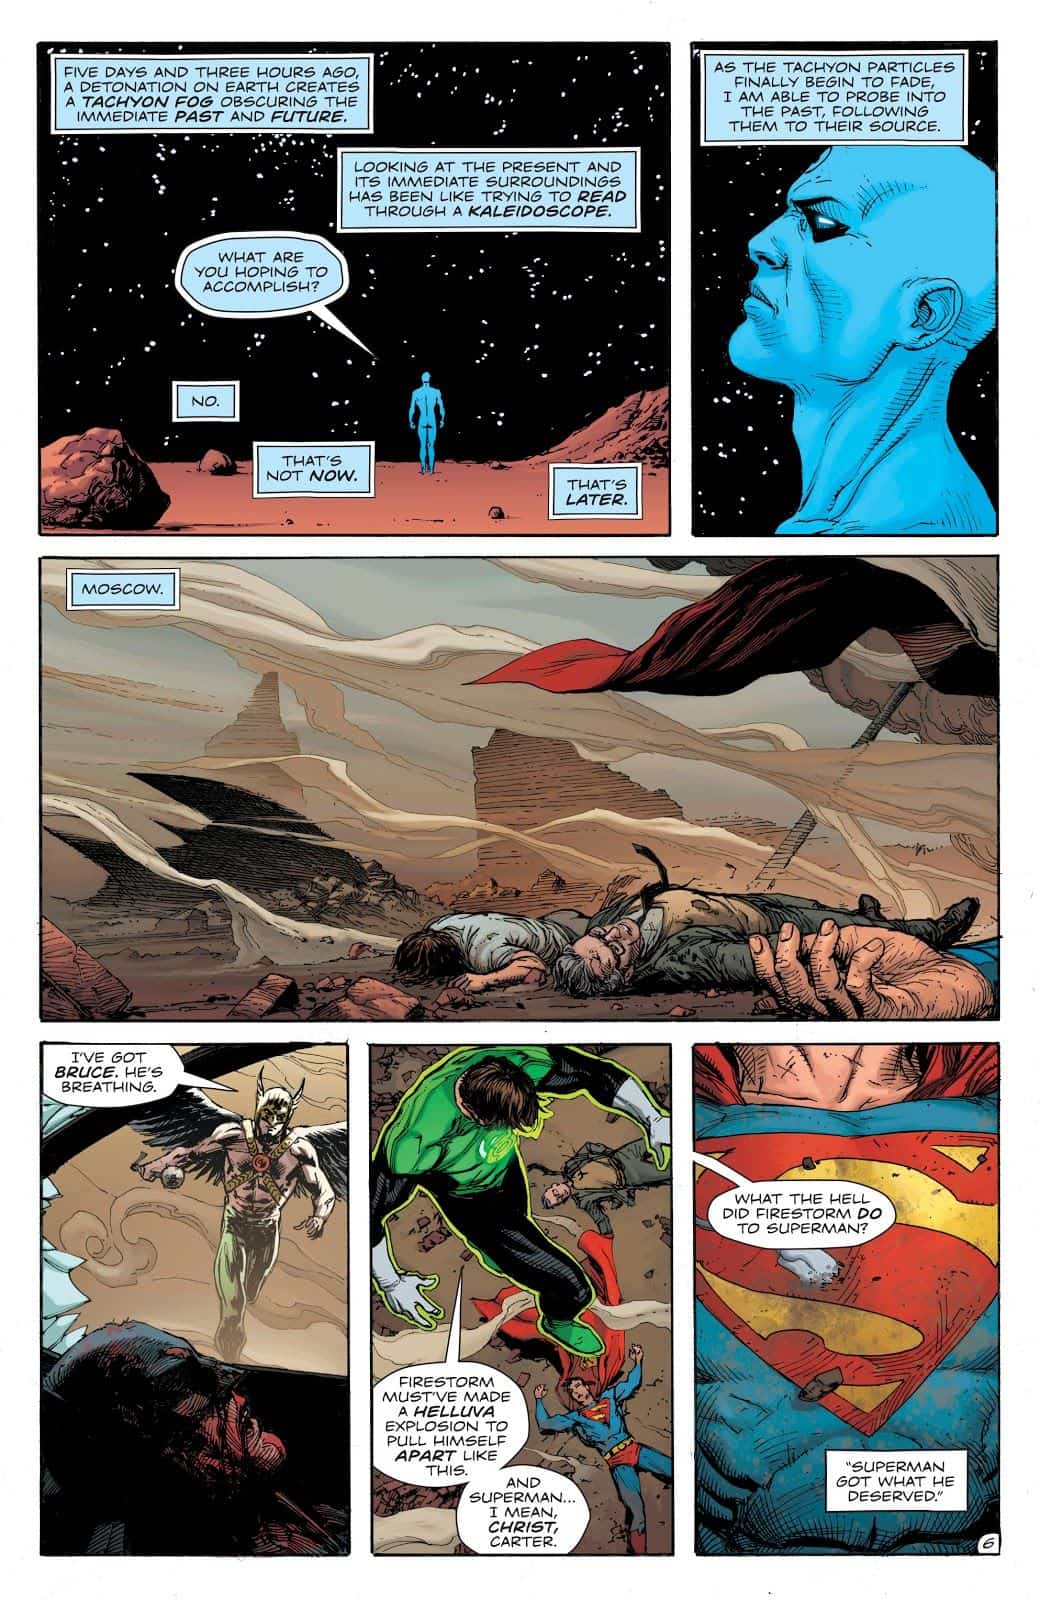 DC Comics Universe & Doomsday Clock #9 Spoilers & Review: Superman, Wally West The ...